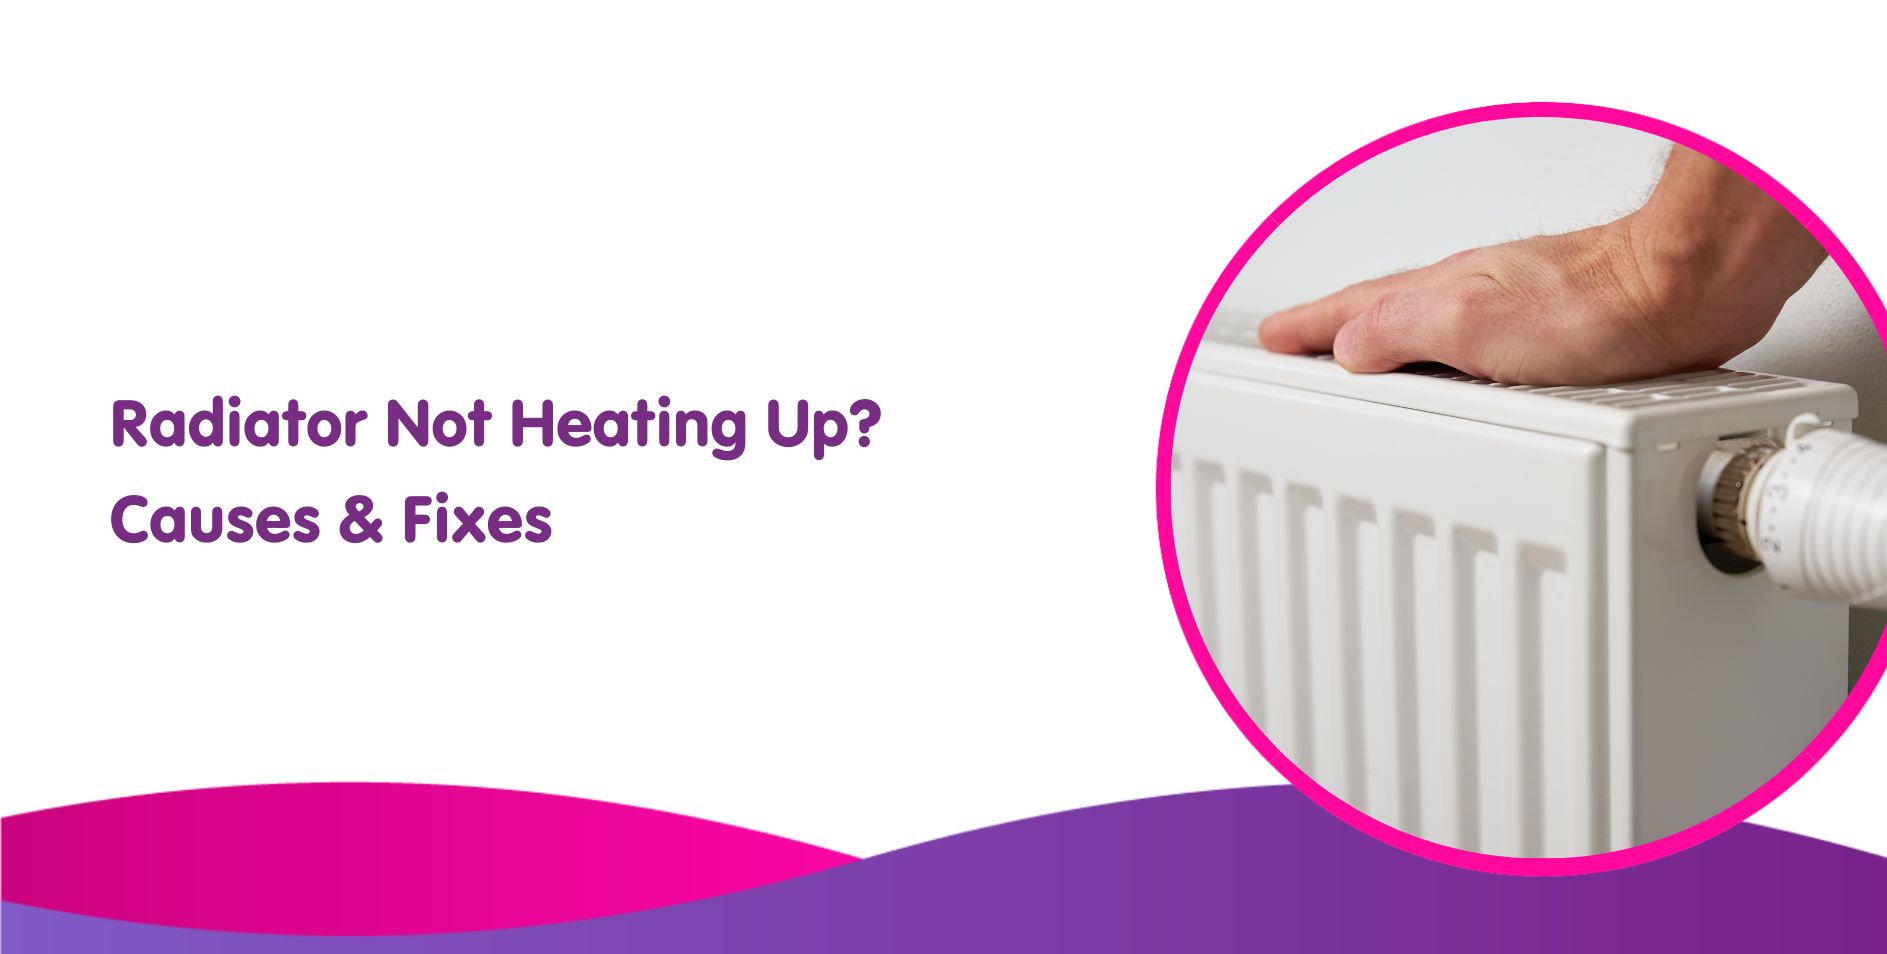 Why are My Radiators Not Heating Up? Causes & Fixes